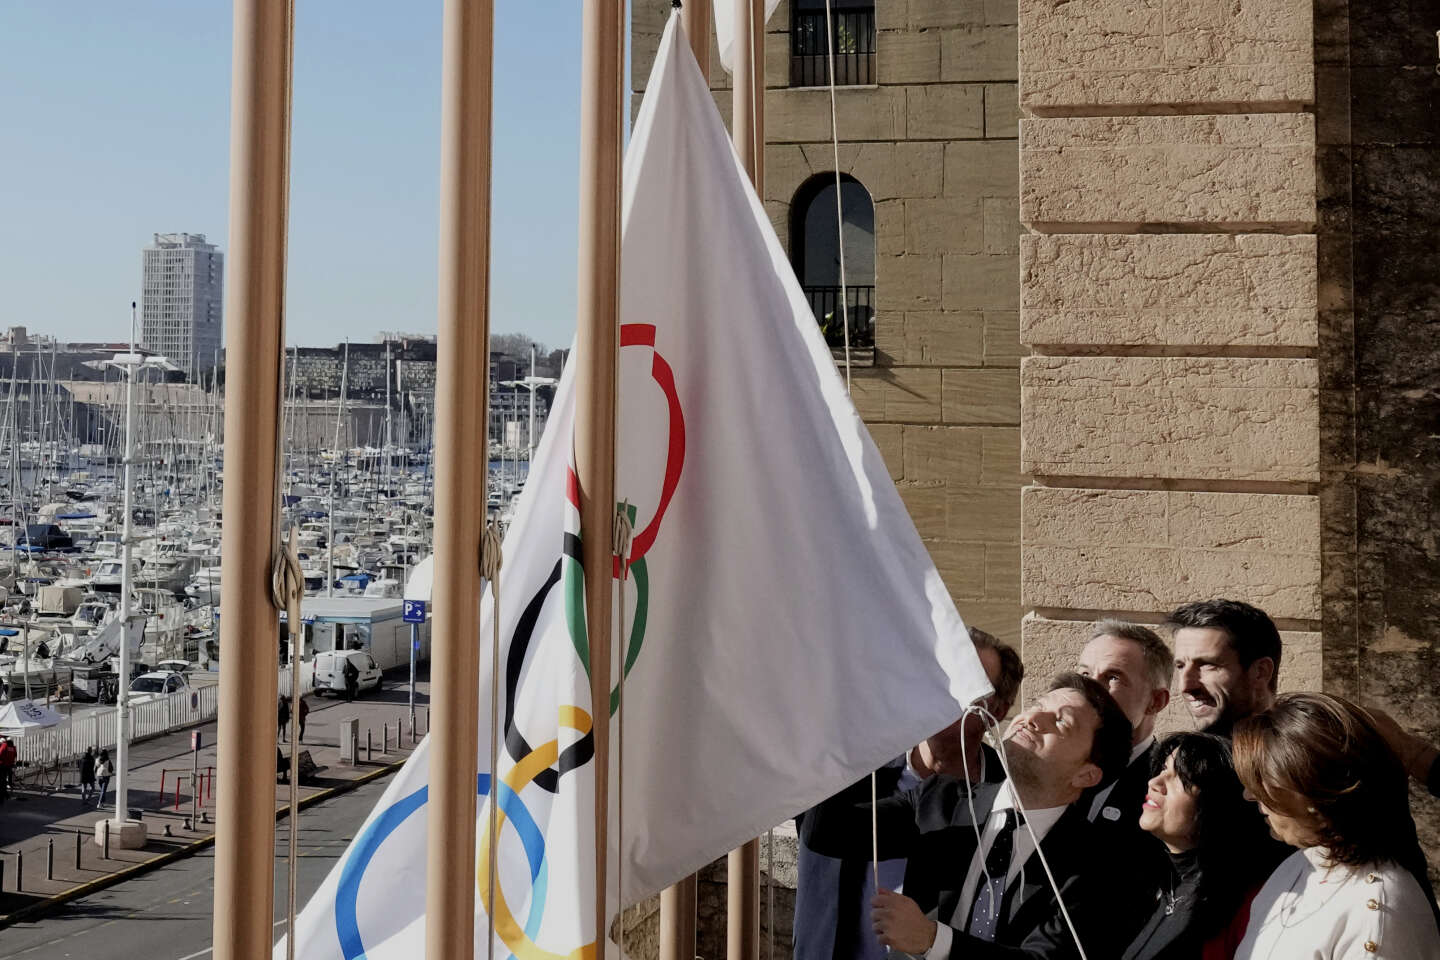 the organizers promise “a great popular celebration” for the arrival of the Olympic flame in Marseille